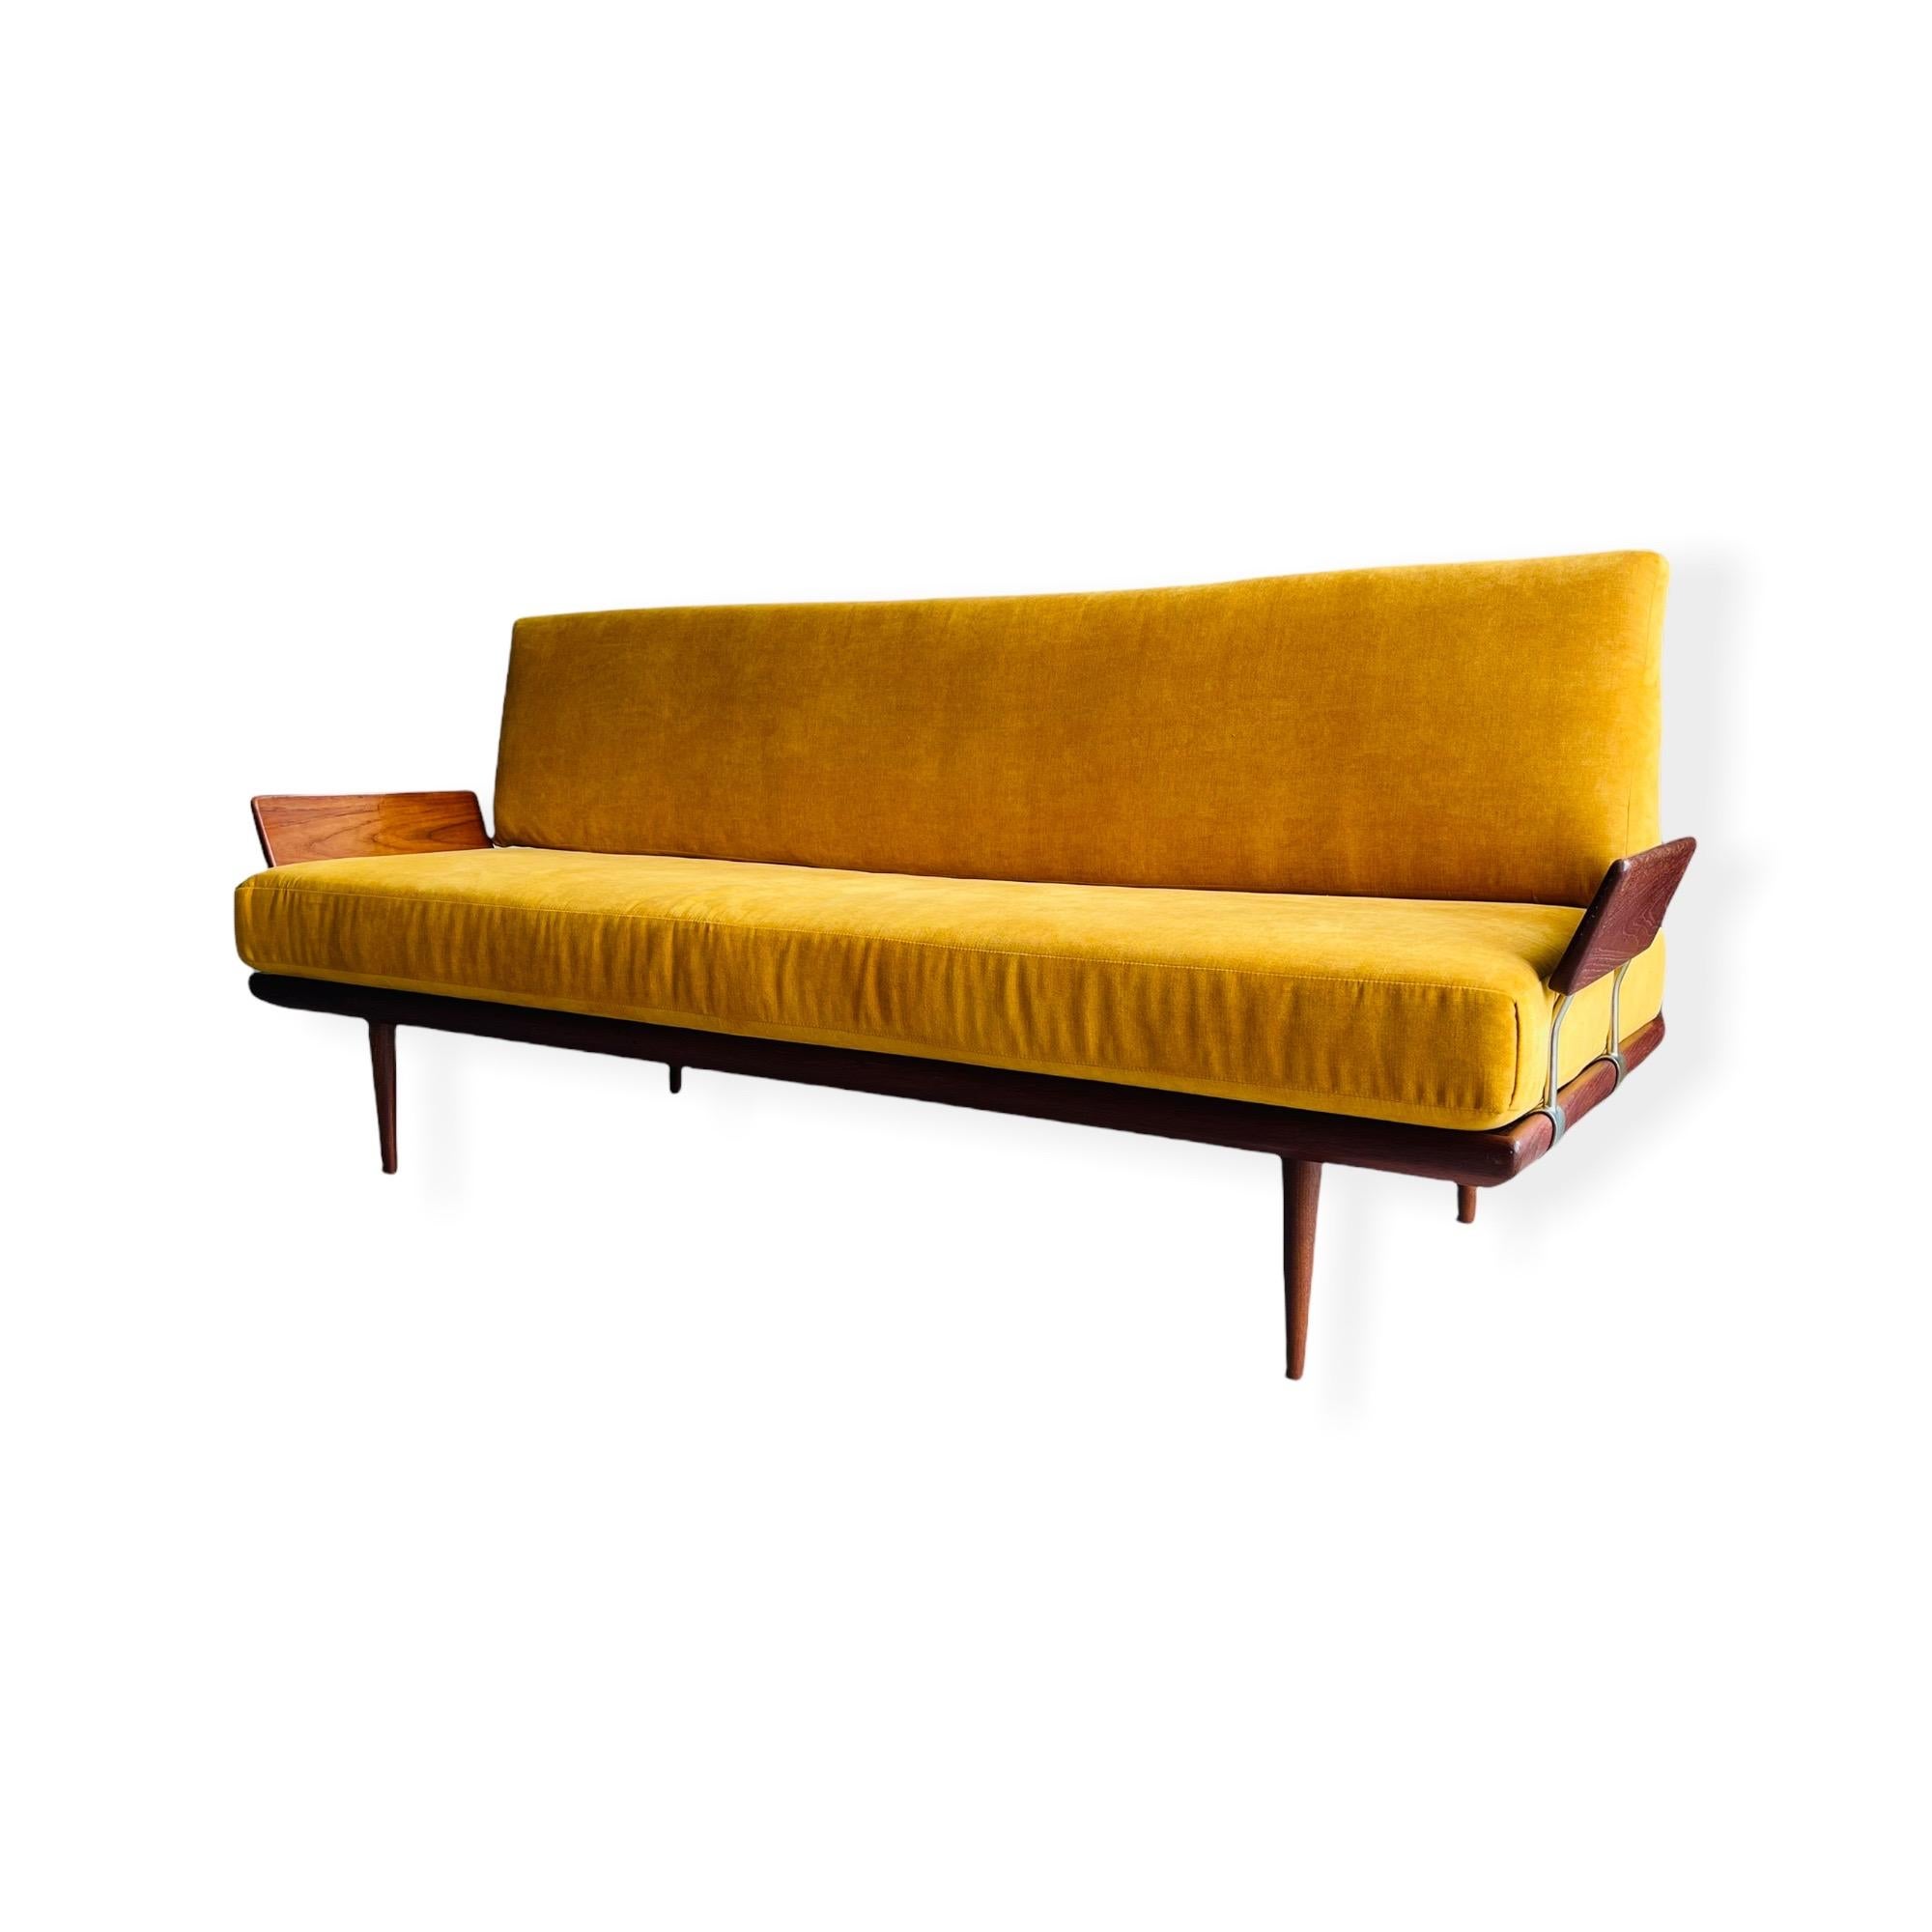 Here is a stunning classic Mid-Century Danish Modern teak Daybed / Sofa designed by Peter Hvidt and Orla Mølgaard-Nielsen for France and Son Denmark. This highly collectible sofa/daybed was fully reupholstered and has brand new foam installed. This